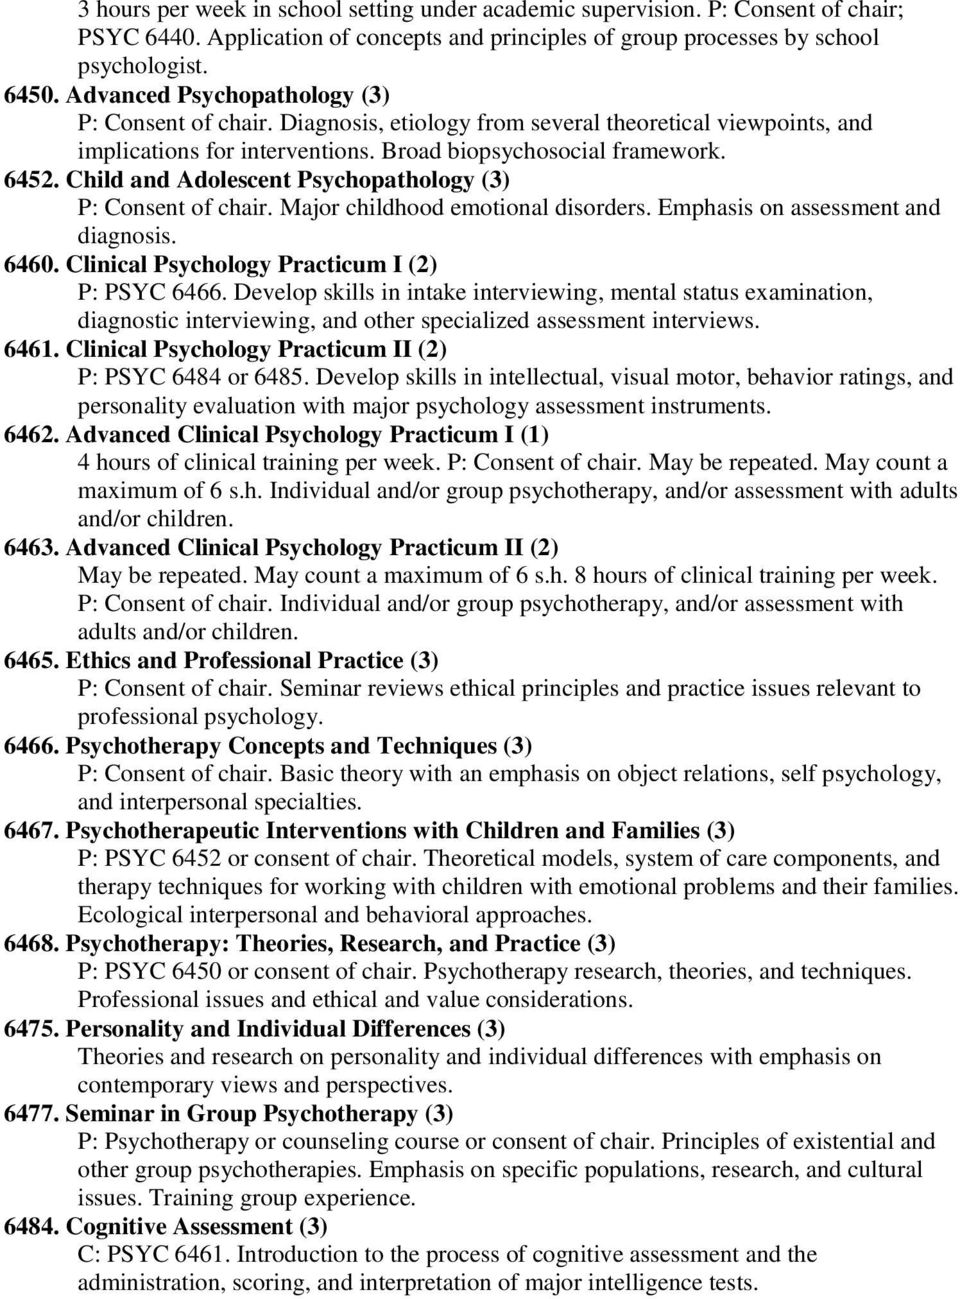 Child and Adolescent Psychopathology (3) P: Consent of chair. Major childhood emotional disorders. Emphasis on assessment and diagnosis. 6460. Clinical Psychology Practicum I (2) P: PSYC 6466.